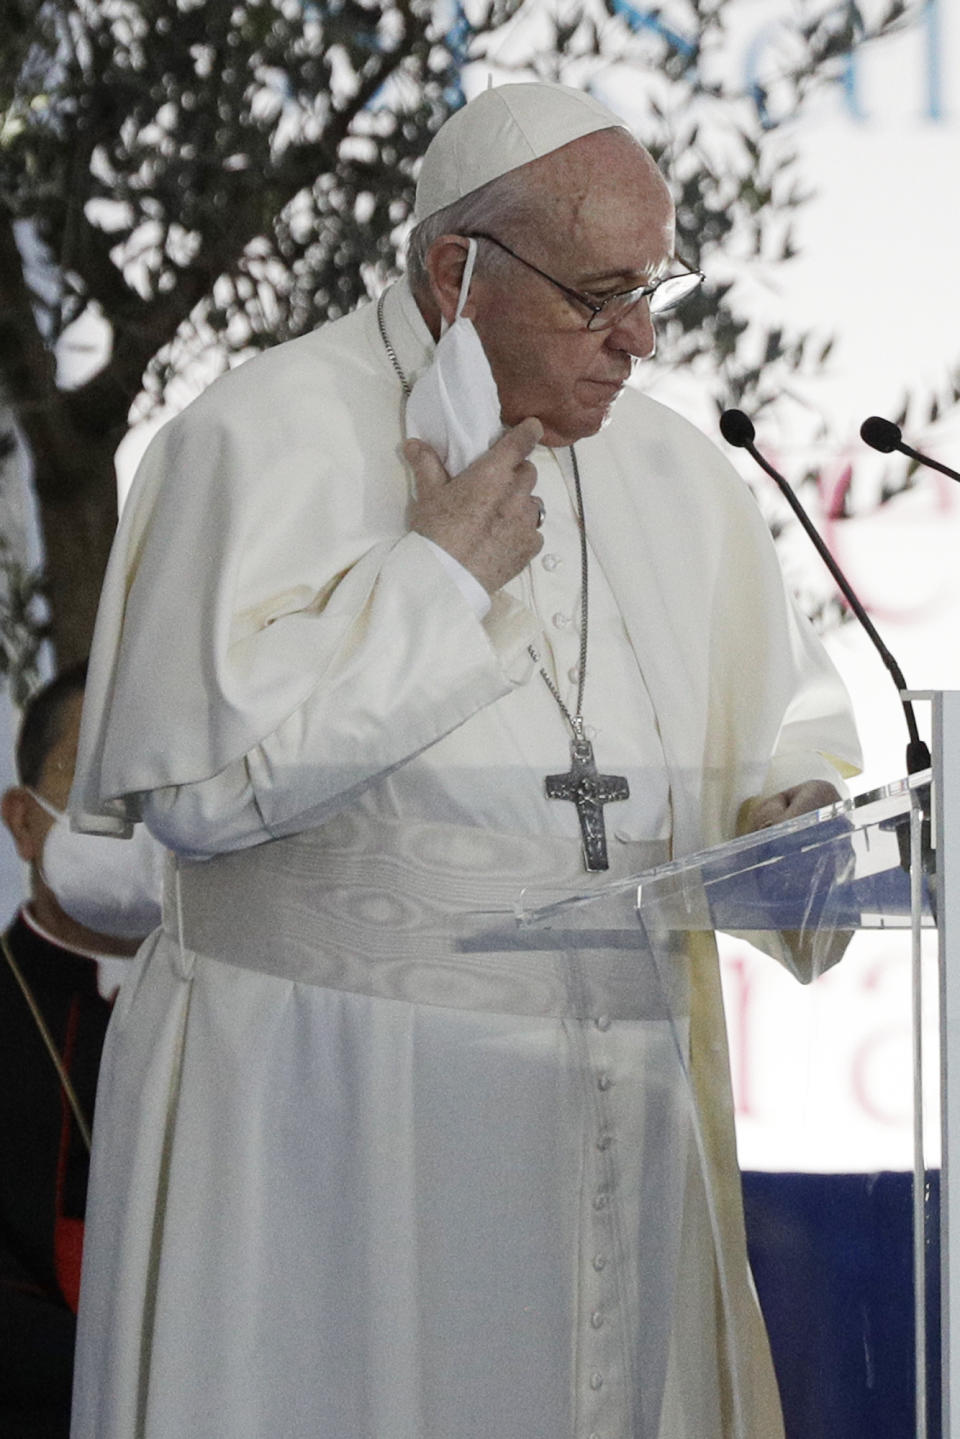 Pope Francis speaks during an inter-religious ceremony for peace in the square outside Rome's City Hall, Tuesday, Oct. 20, 2020 (AP Photo/Gregorio Borgia)